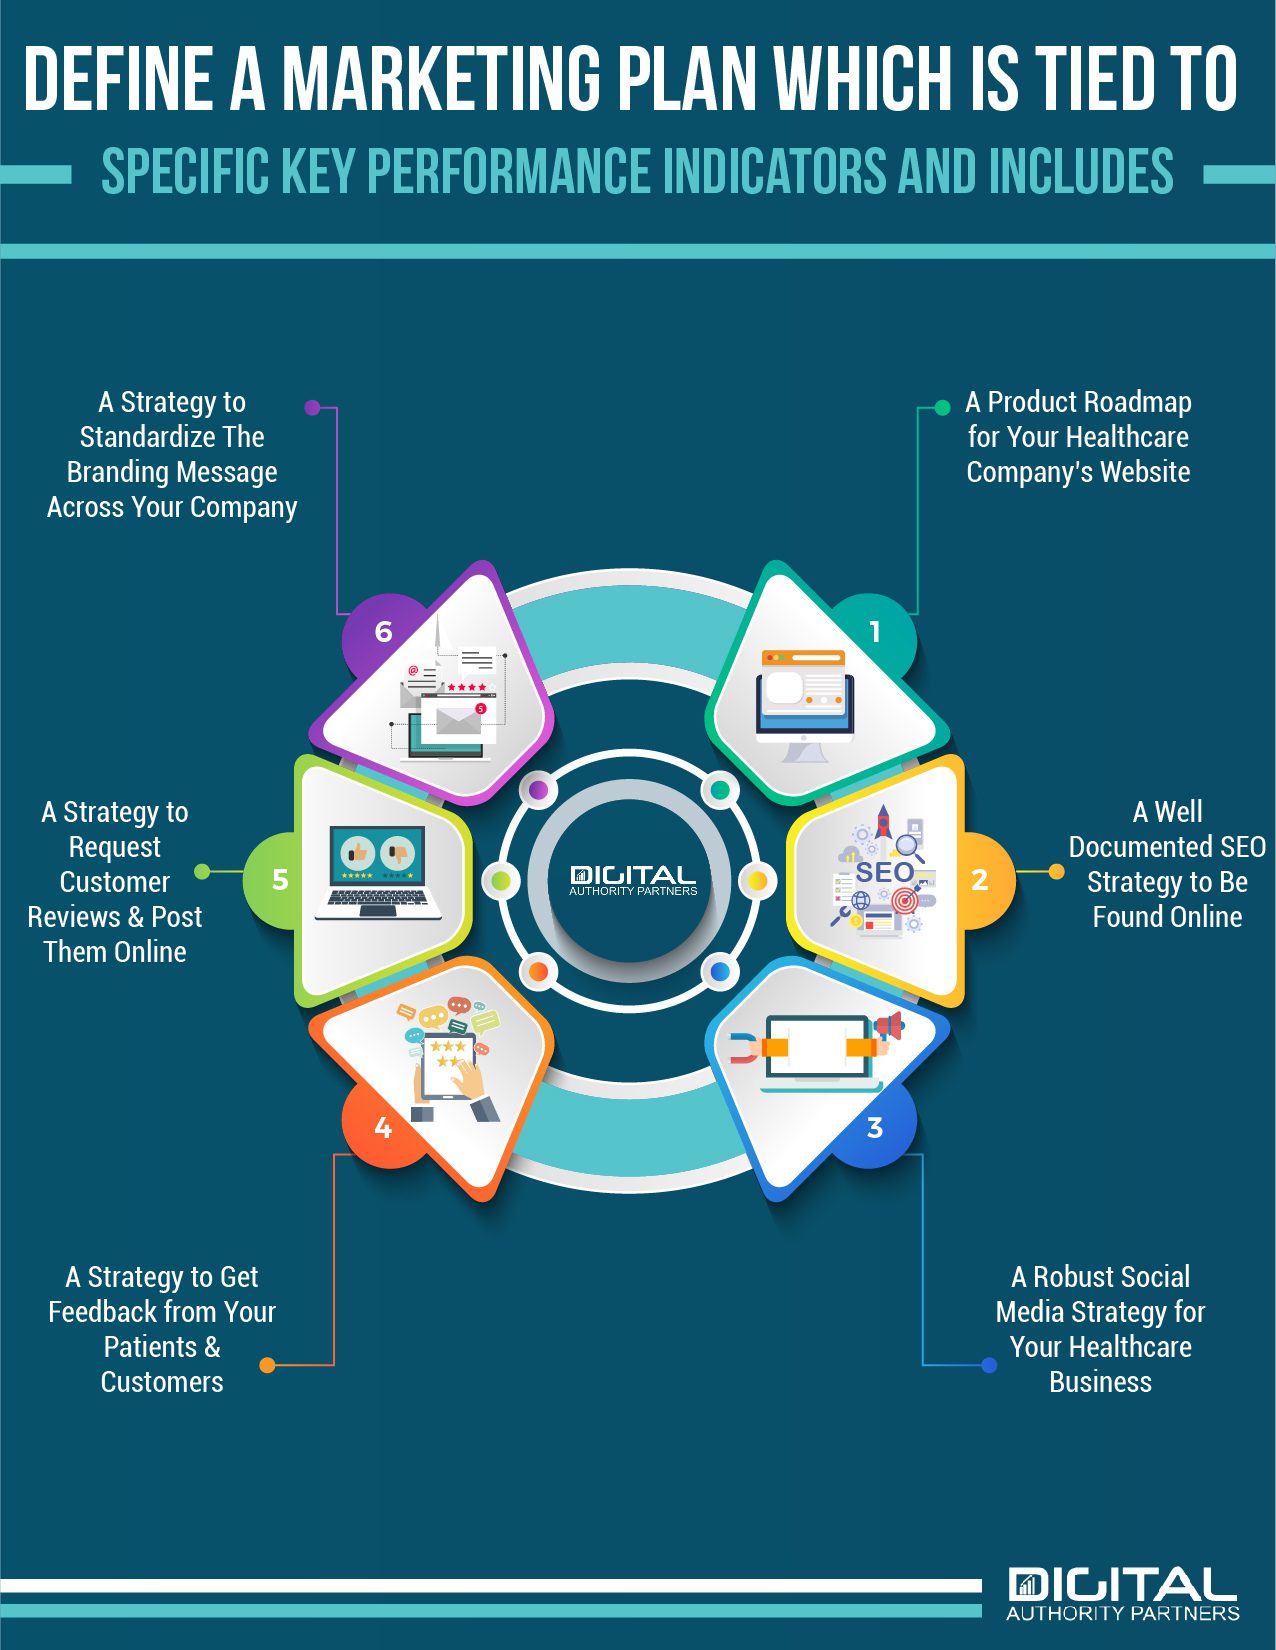 Infographic on the key performance indicators of a healthcare marketing plan